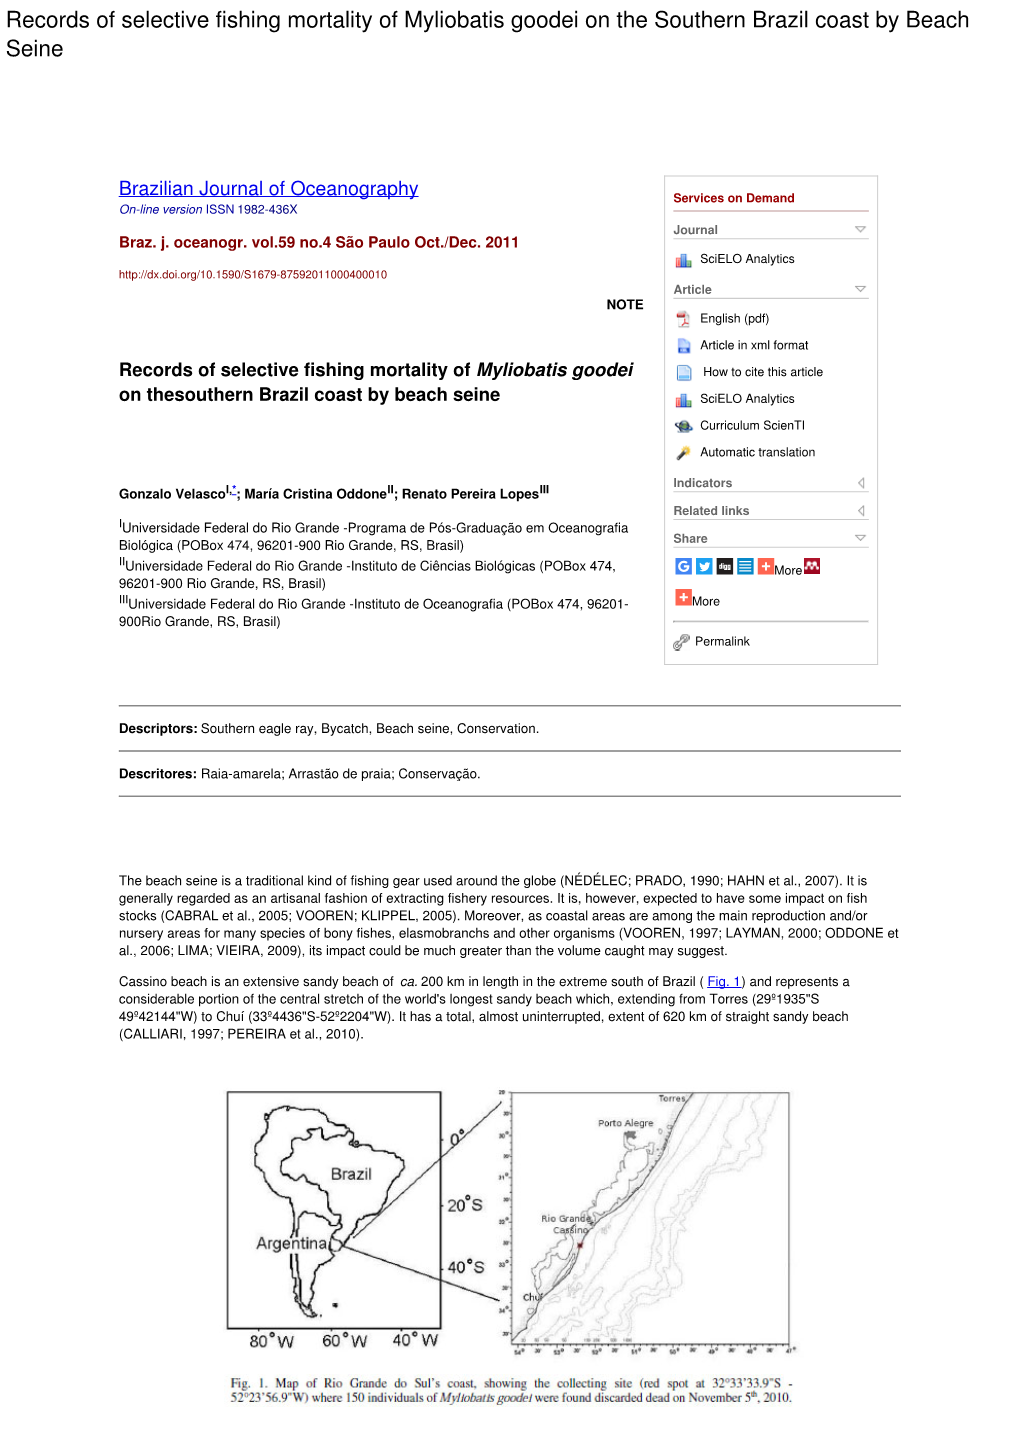 Records of Selective Fishing Mortality of Myliobatis Goodei on the Southern Brazil Coast by Beach Seine